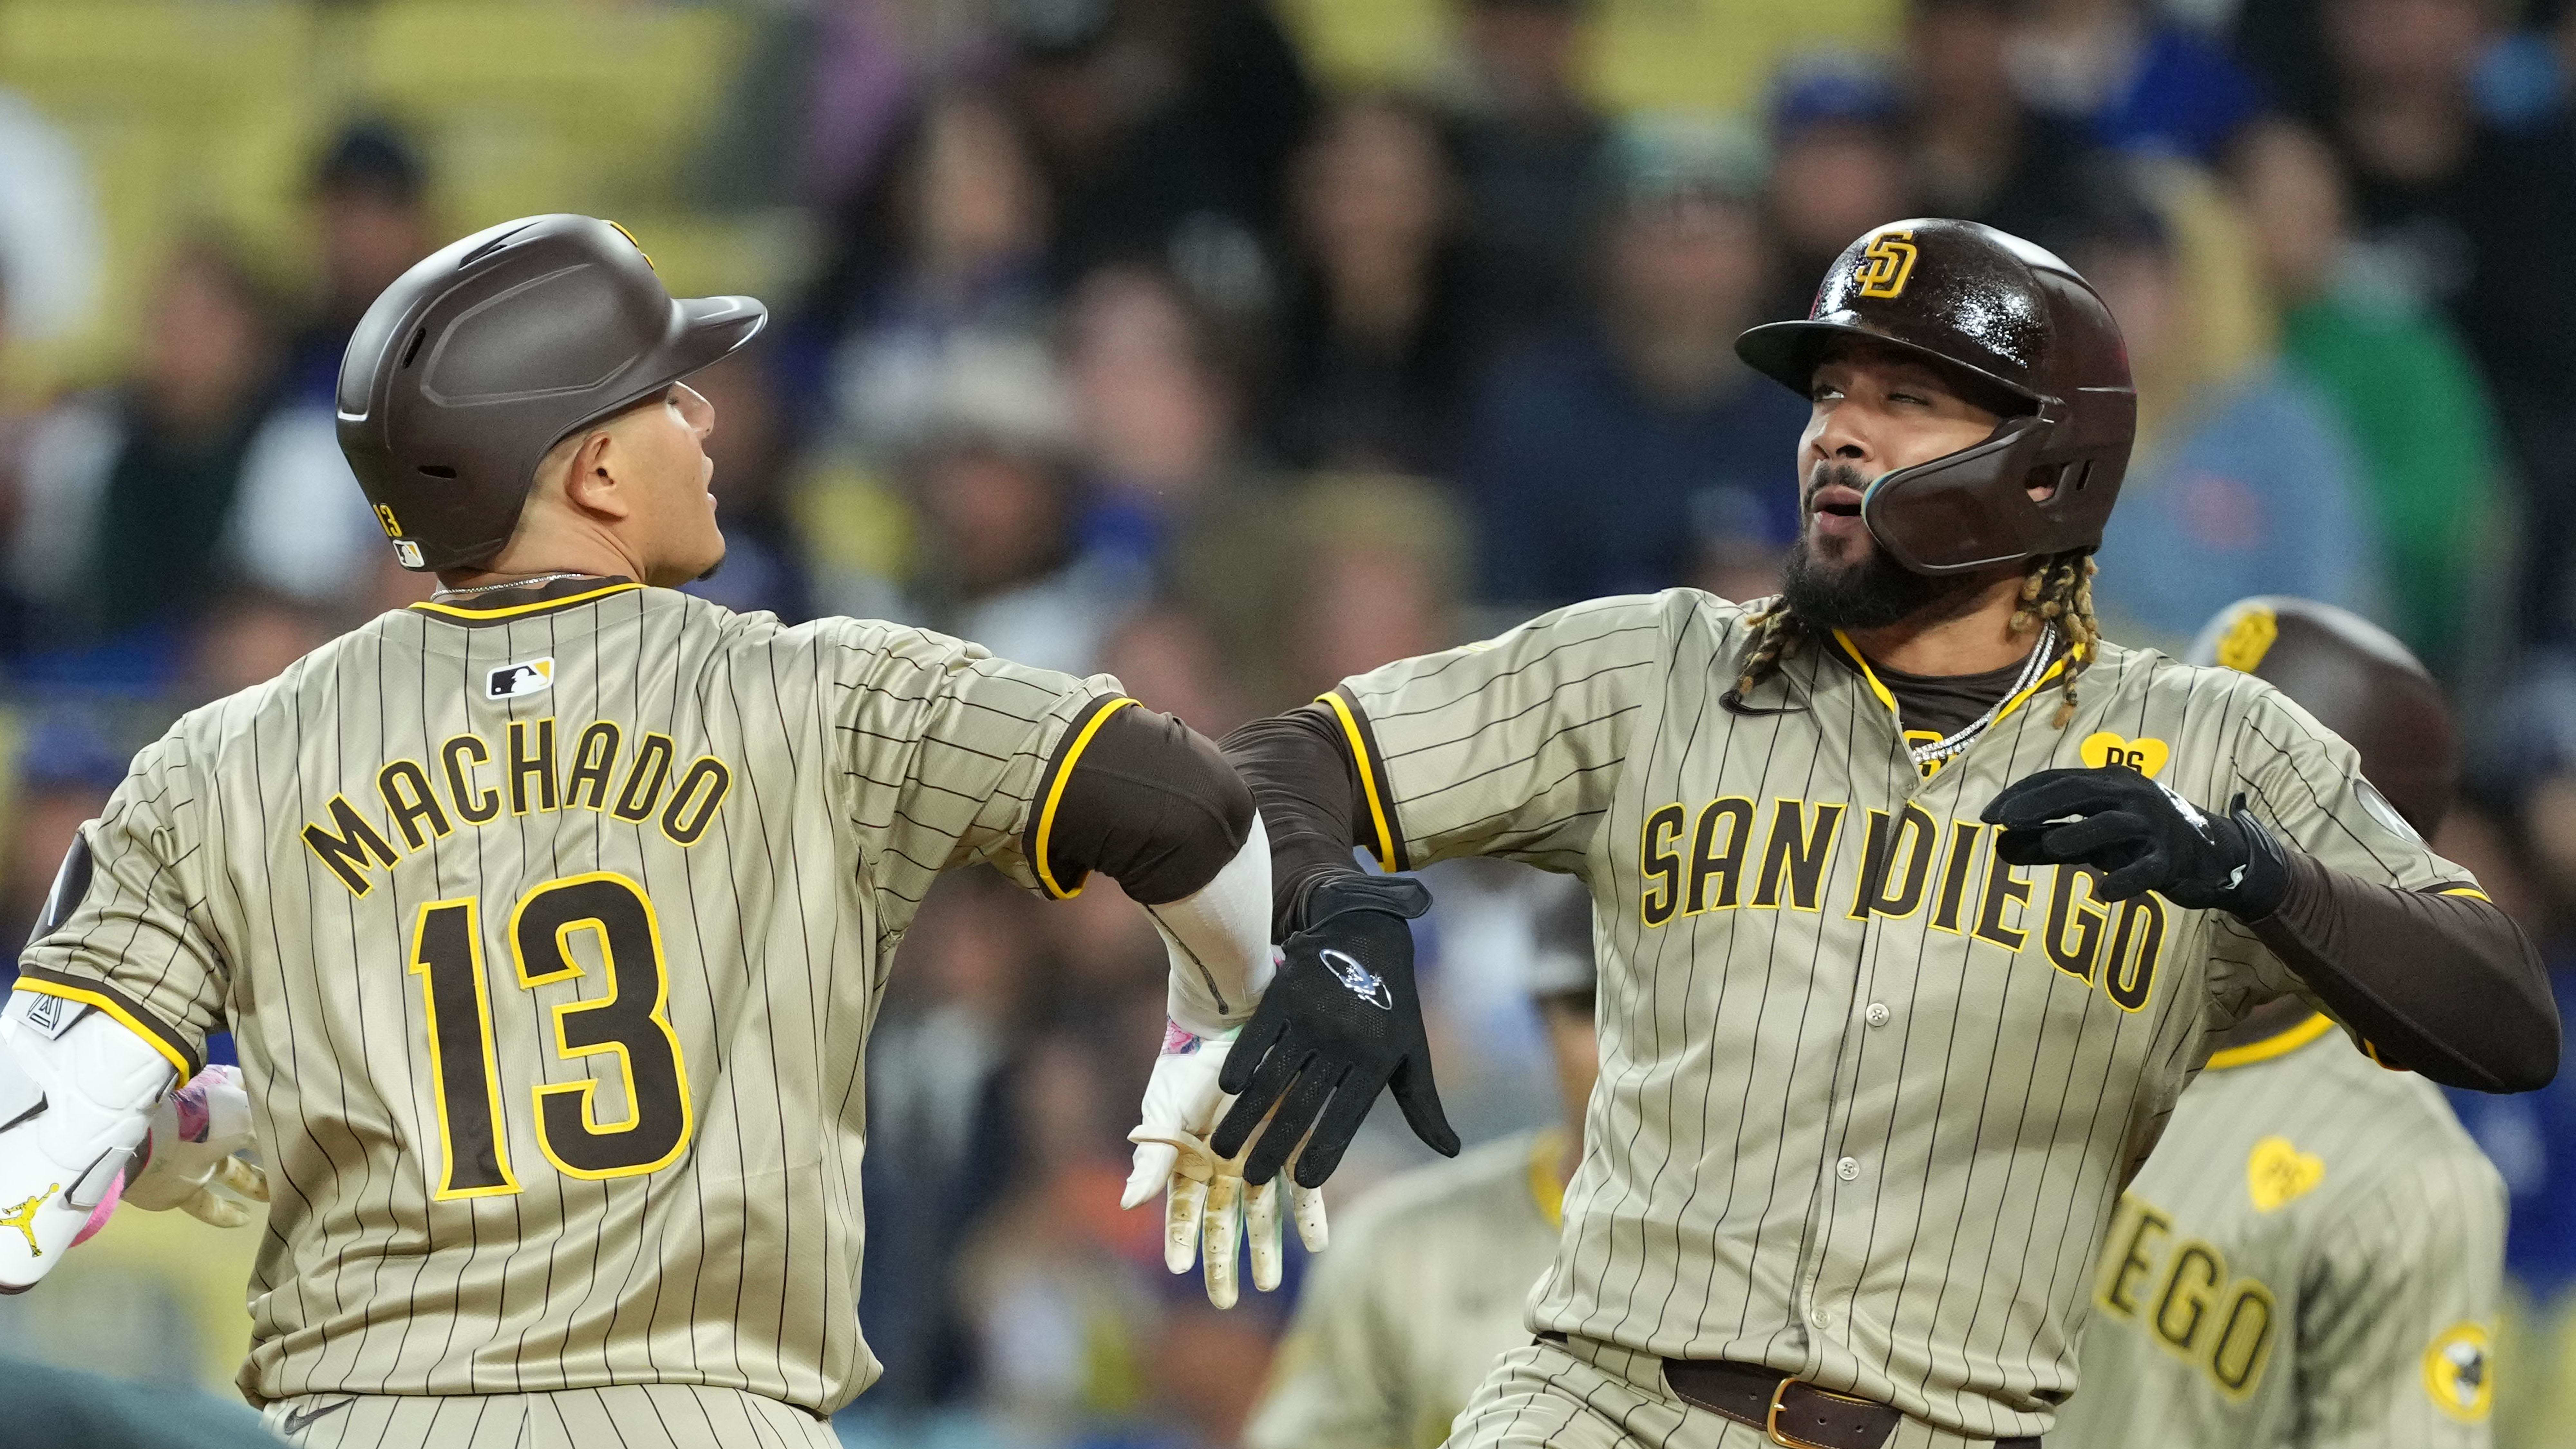 Padres' Veteran Thinks Teammates Need to 'Tone it Down a Little Bit'